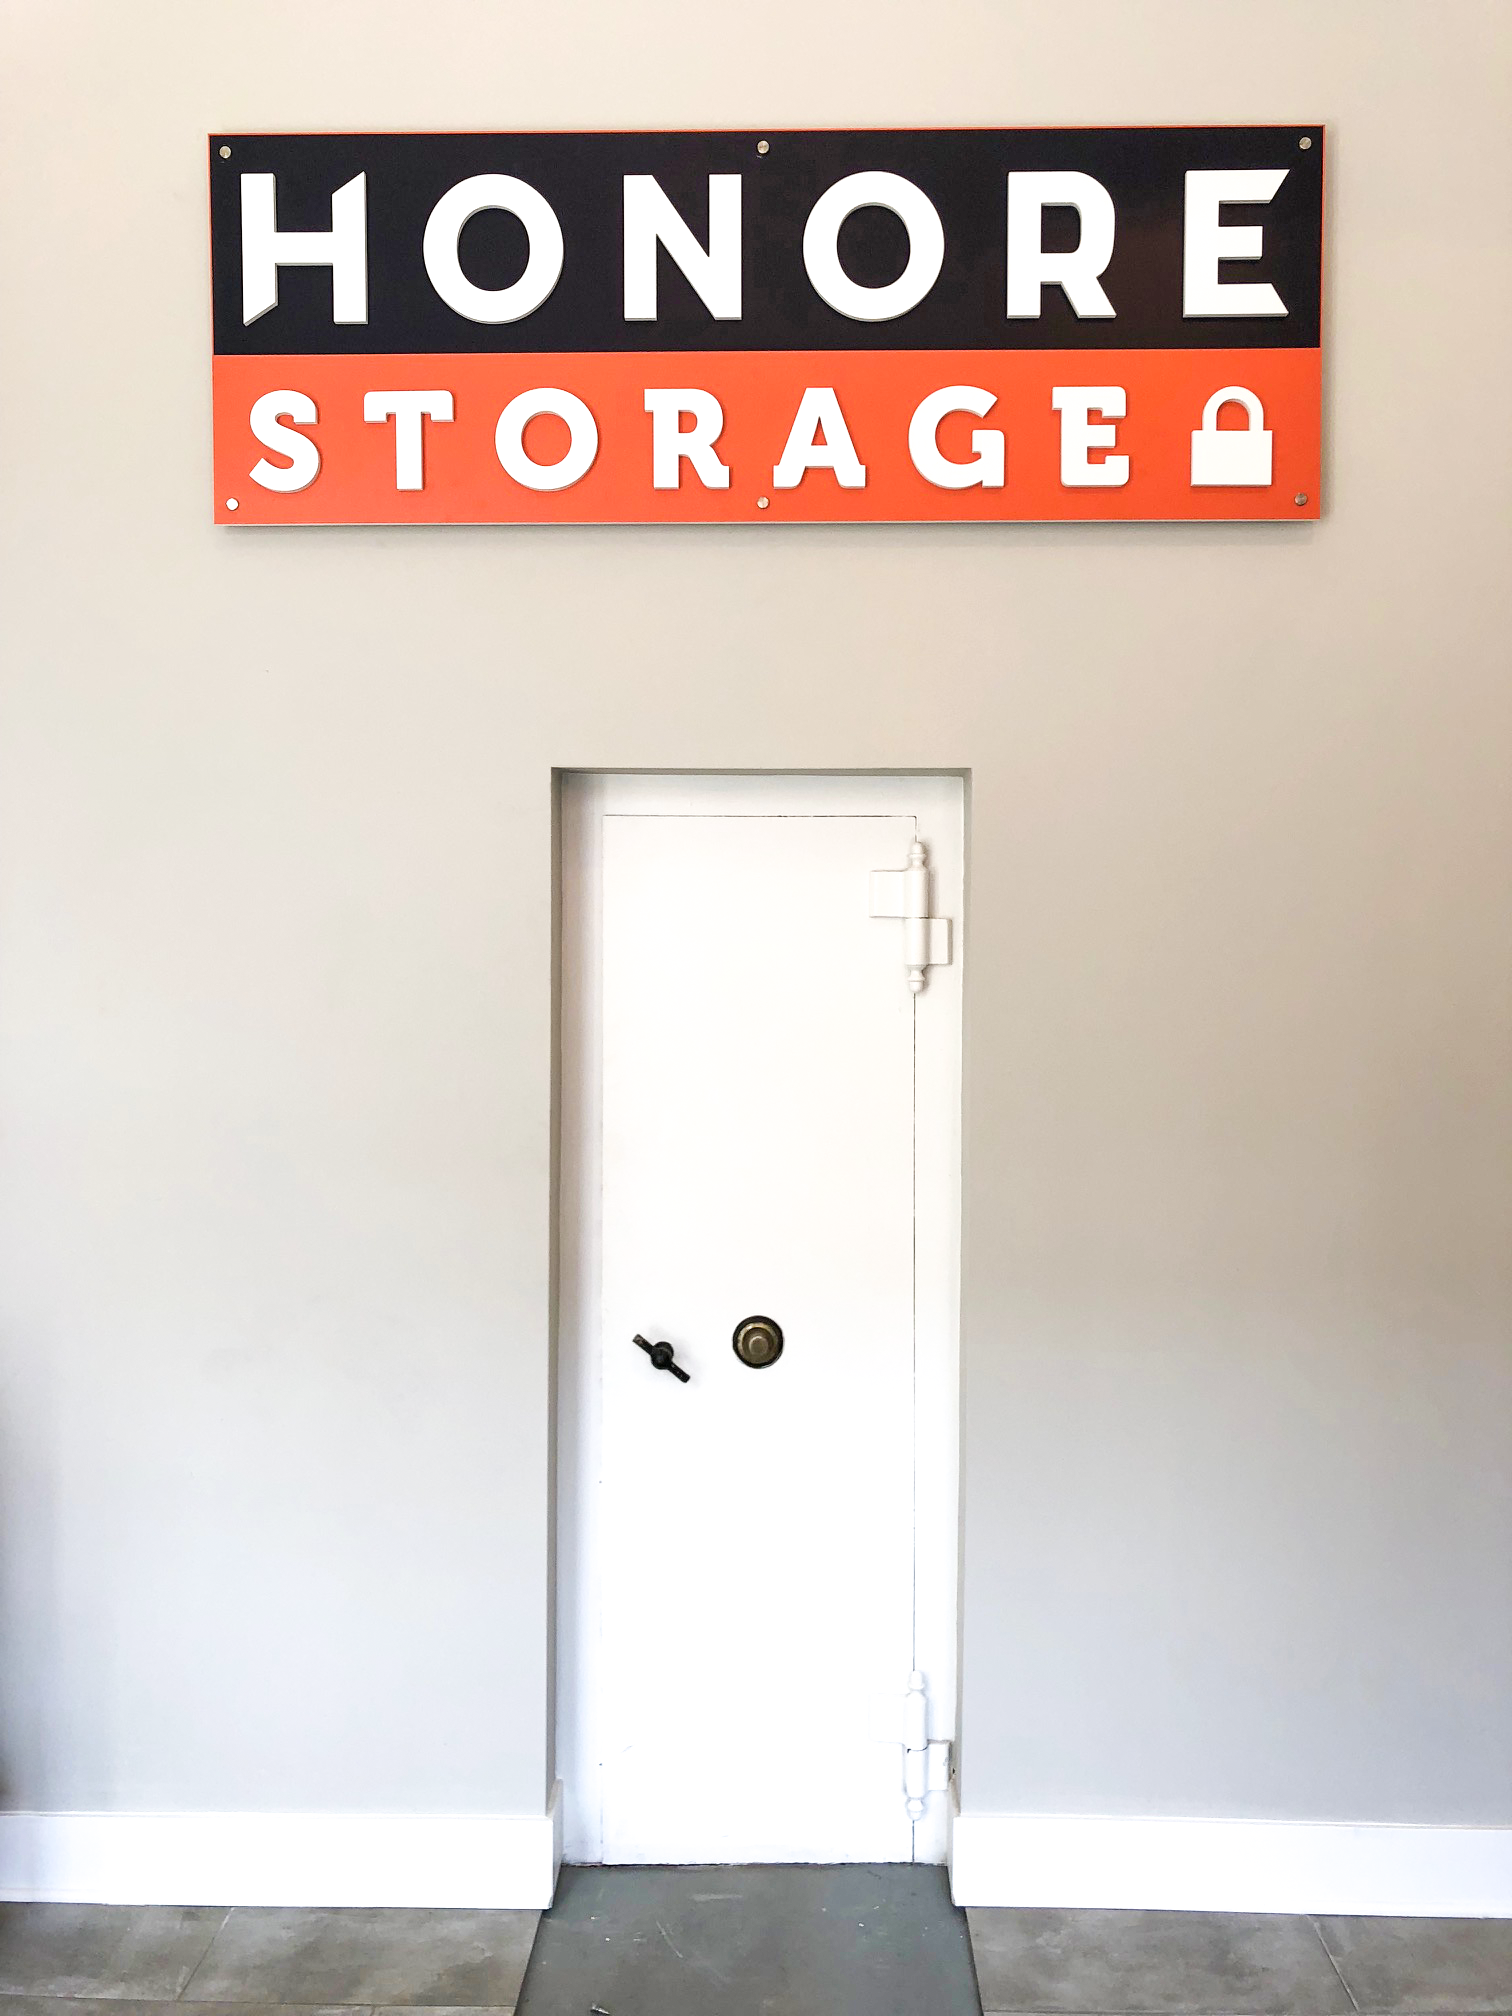 An Honor Storage sign